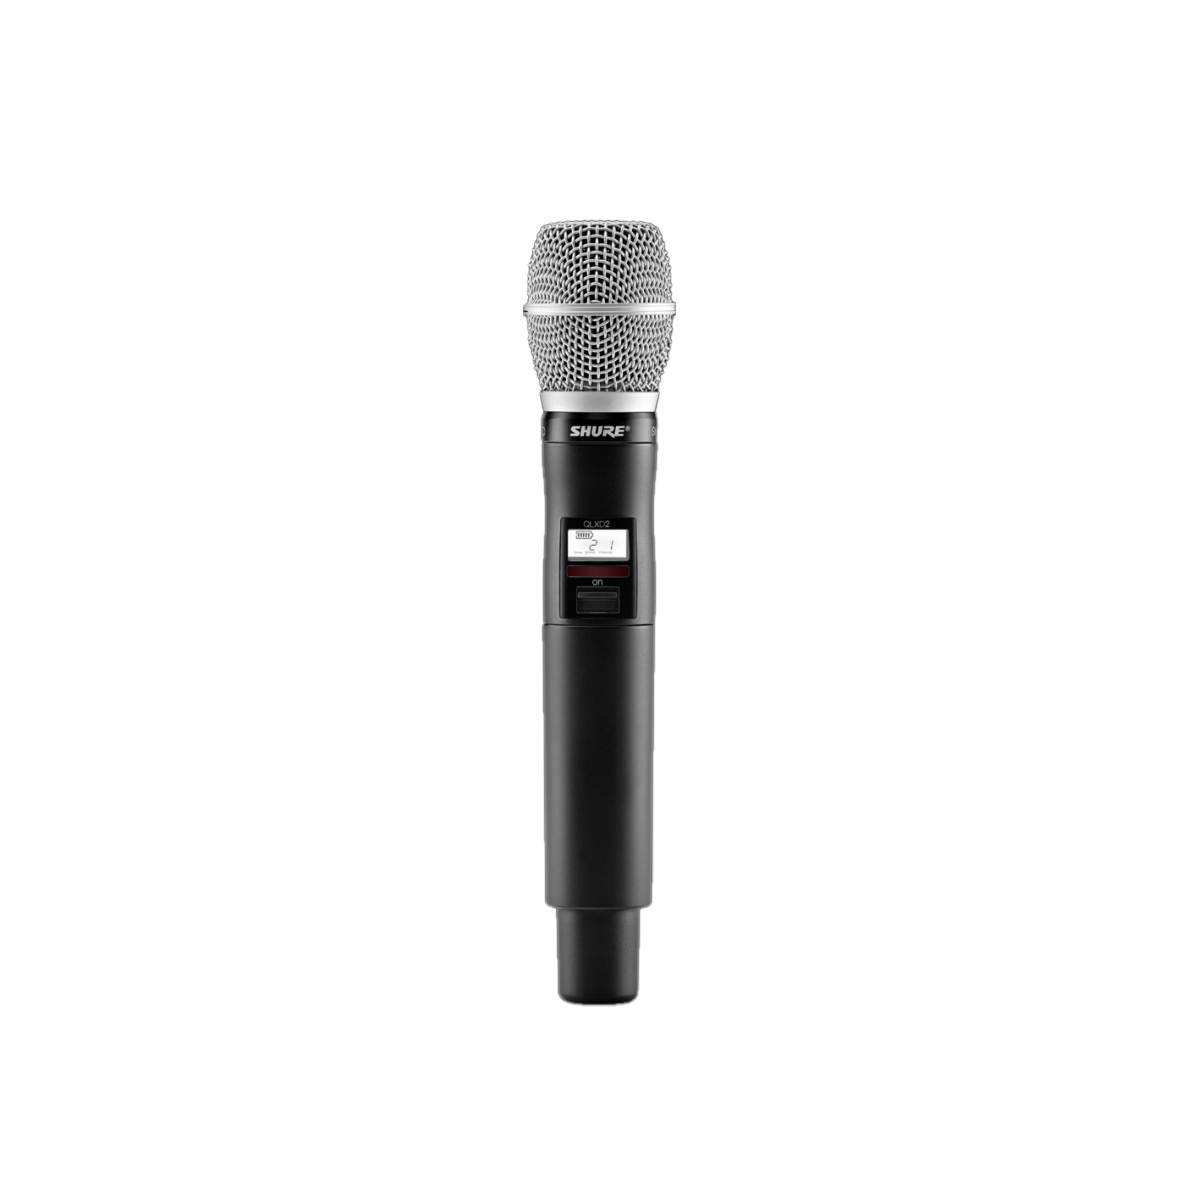 QLXD2/SM86=-G50 Handheld Transmitter with SM86 Microphone